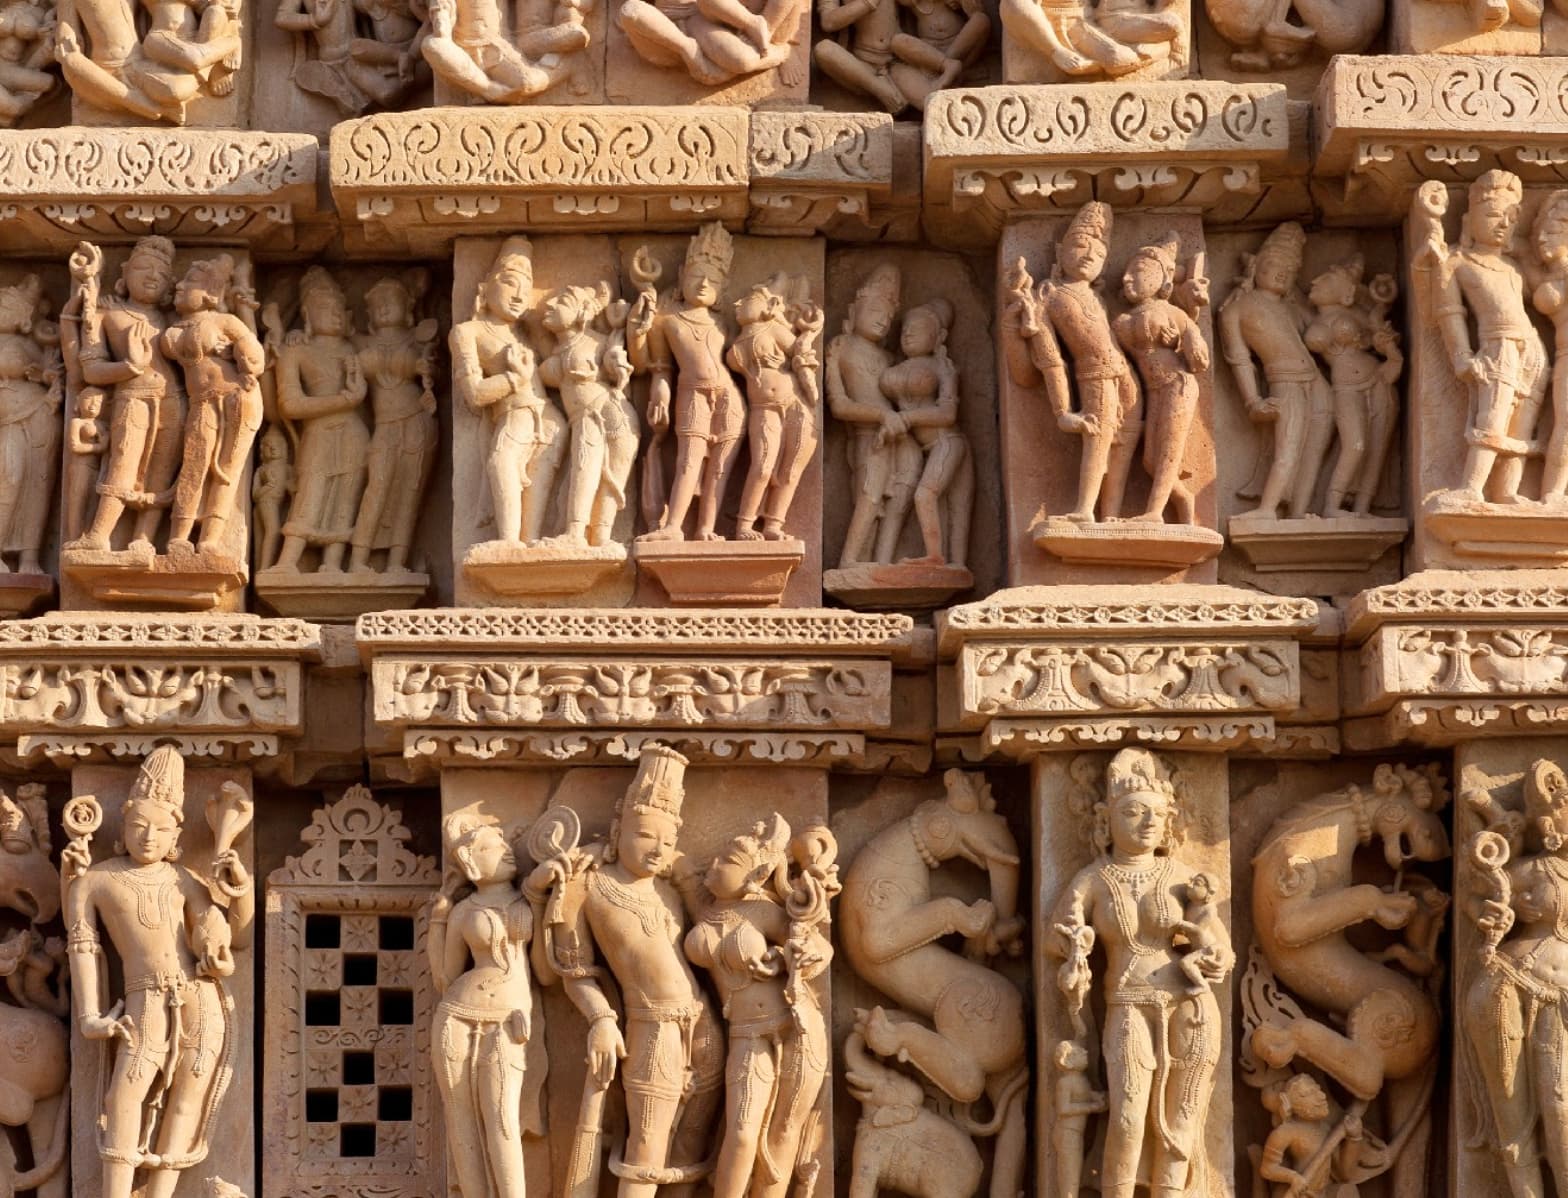 Between 300 and 400 BC, Vatsyayana Mallanaga wrote the Kama Sutra, which candidly discussed s—uality and broader topics, like love and fulfillment. 